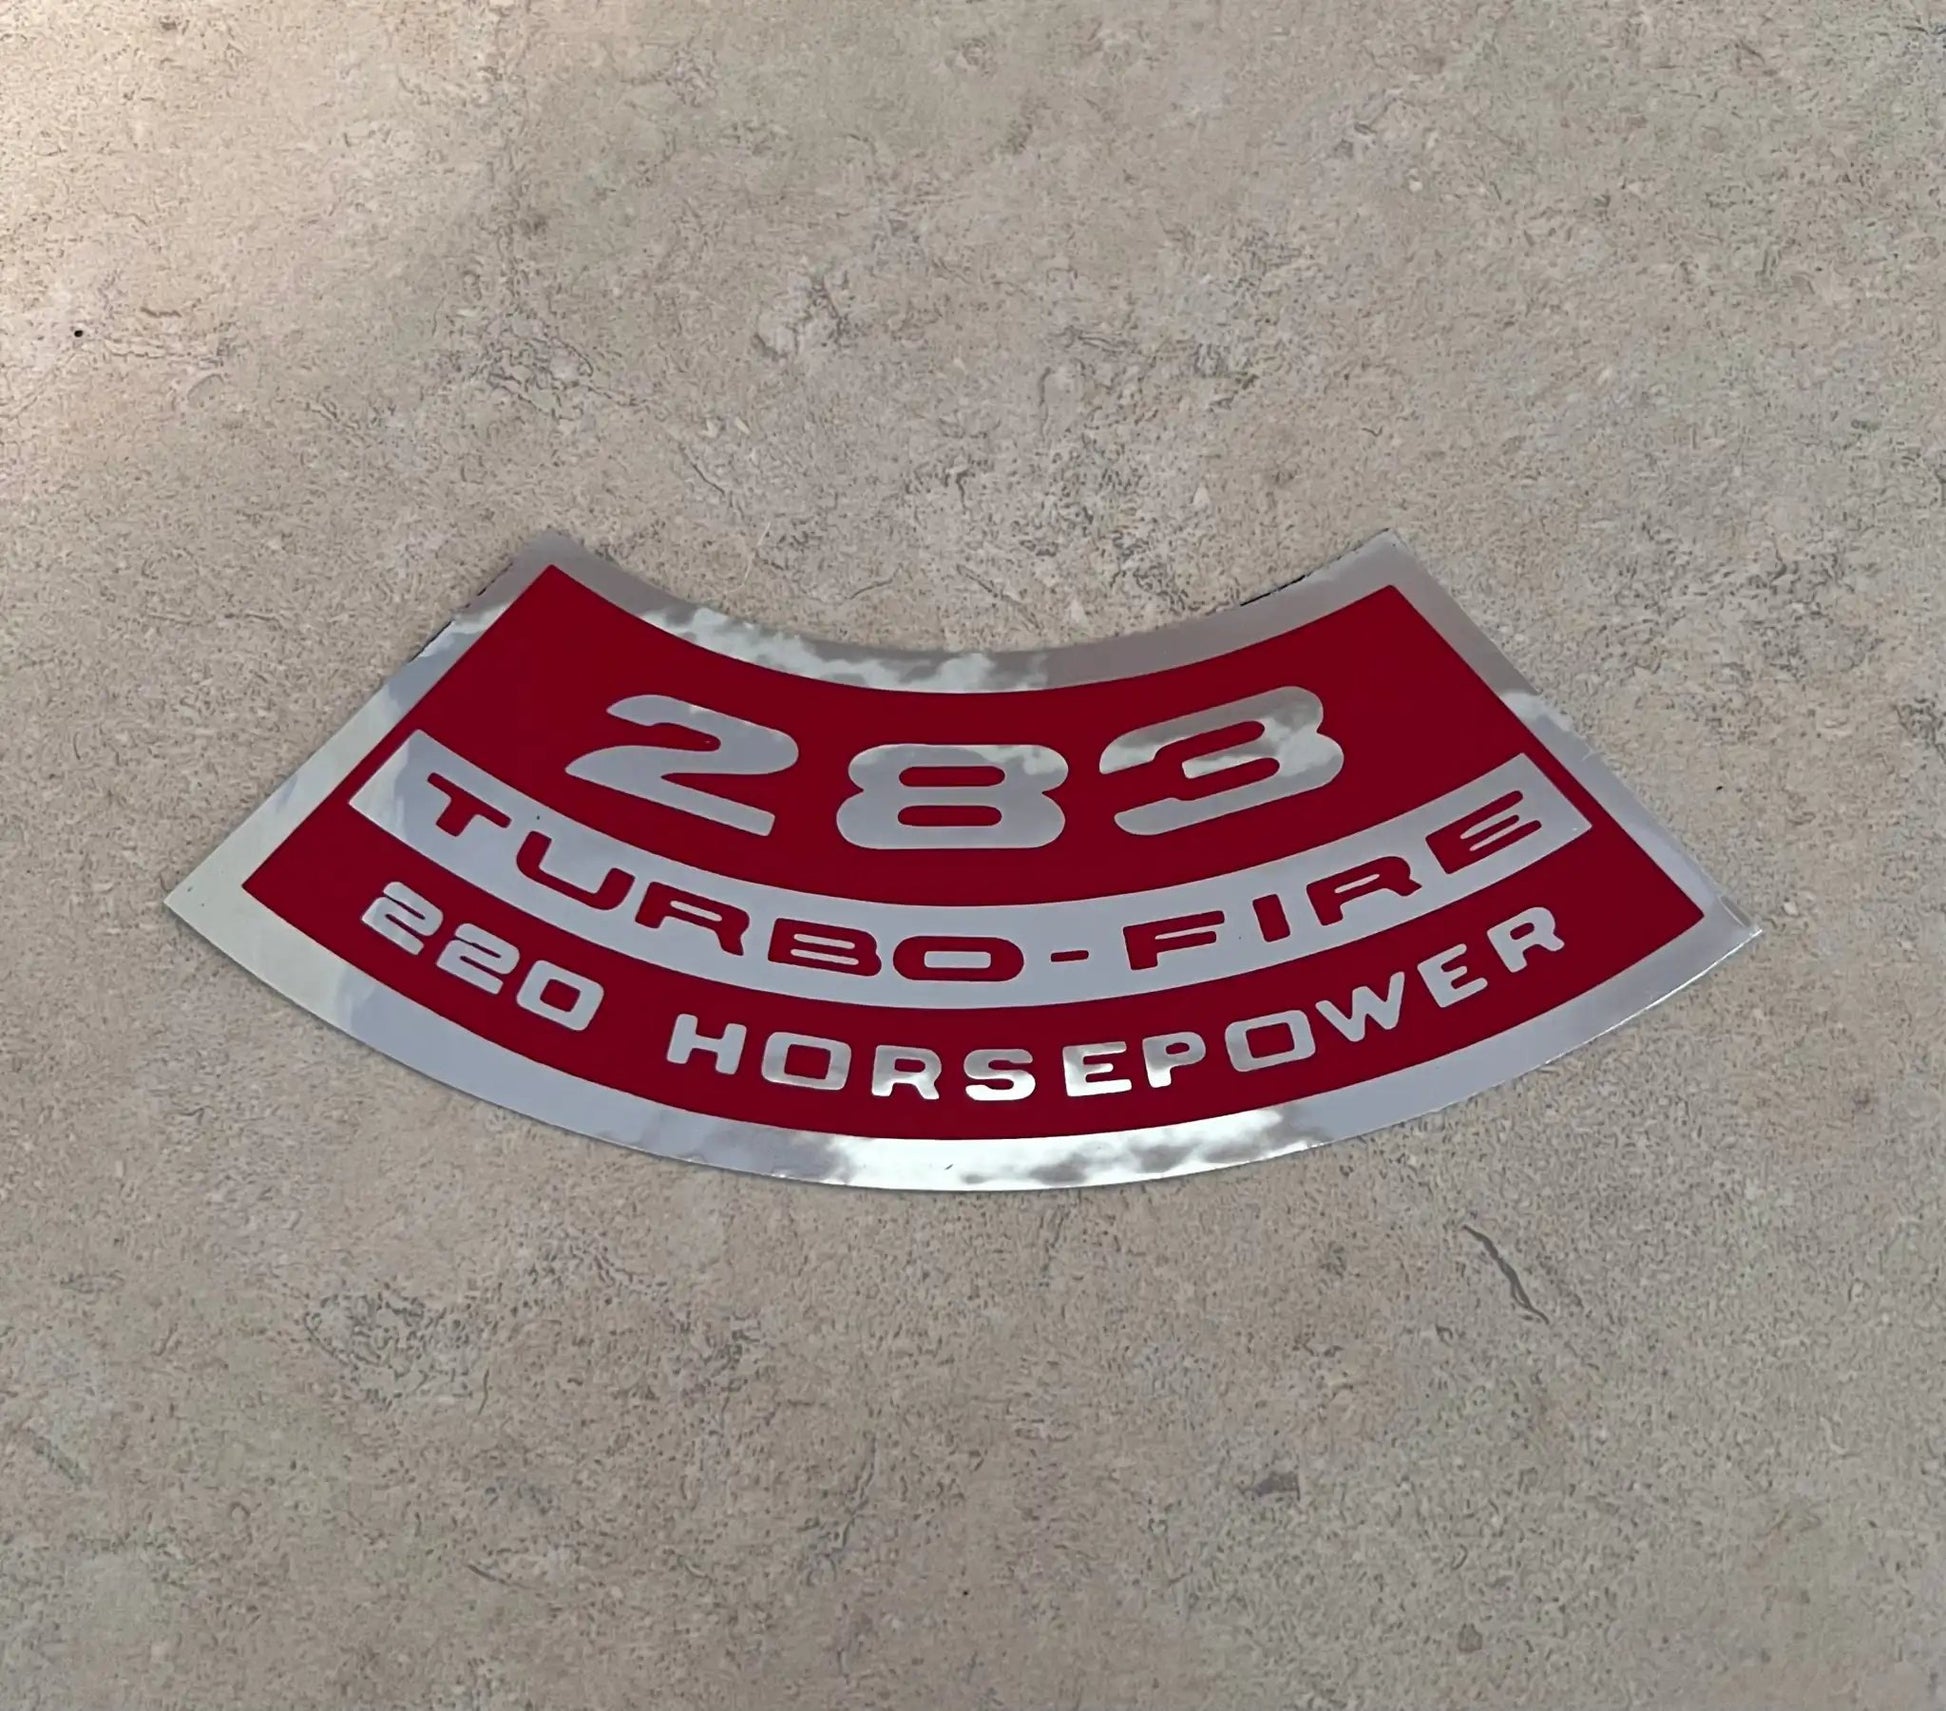 283 Turbo Fire 220 Horsepower Decal Air Cleaner Chevrolet 1960s-1970s Auto Truck. Relic has been stored safely away for decades and measures approx 2 in x 6 in. 